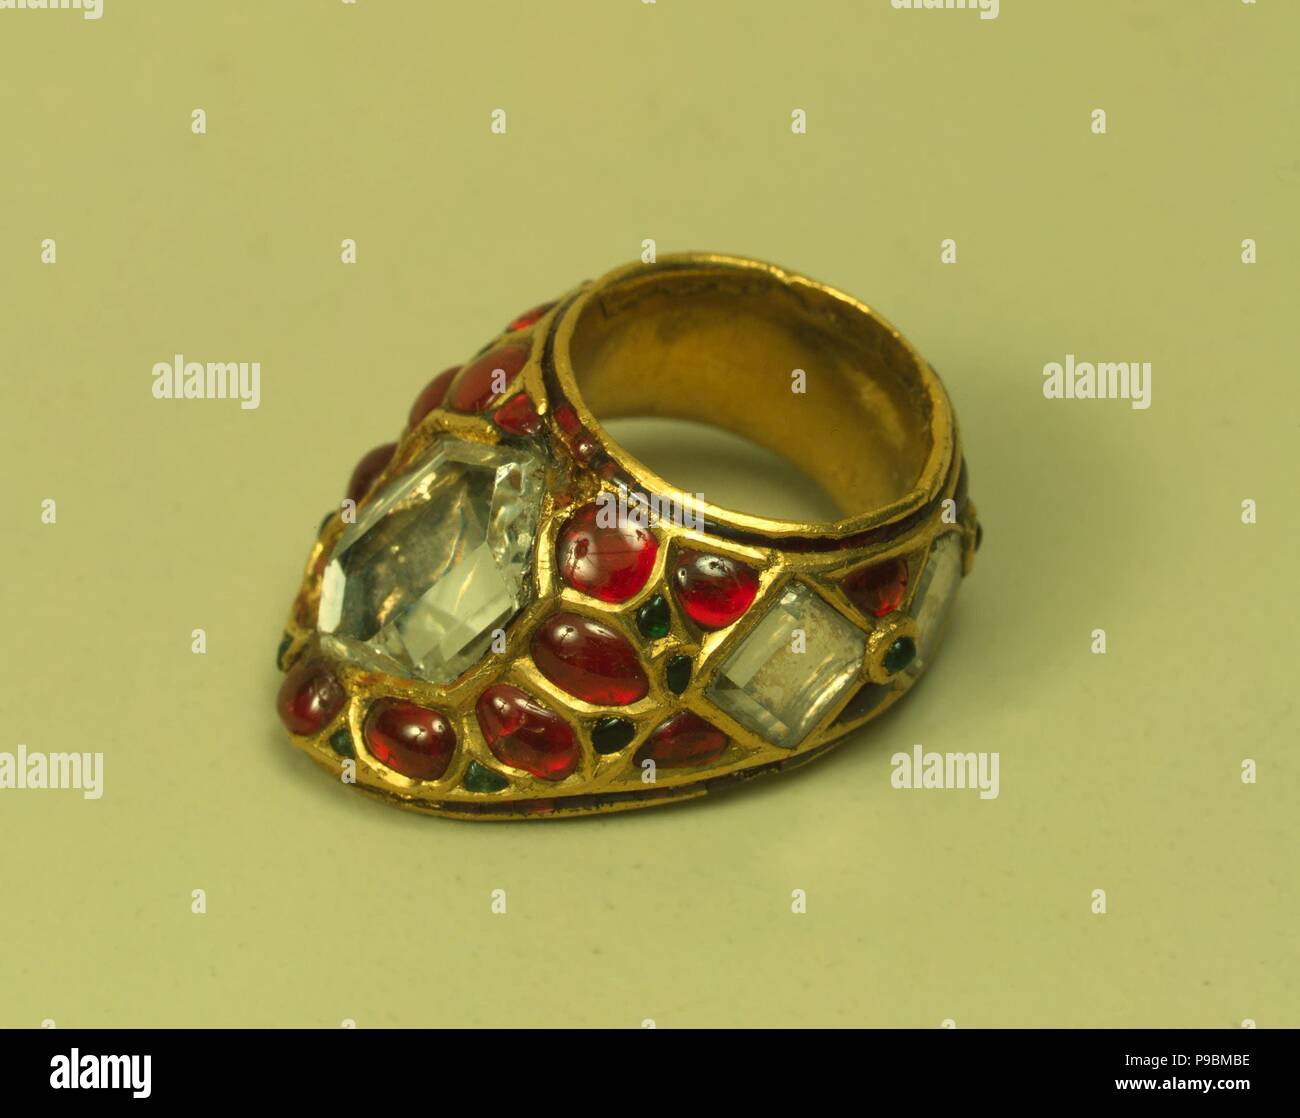 Ceremonial Archery Thumb Ring Belonged to Shah Jahan (Present of King of Persia Nader Shah to Empress Anna). Museum: State Hermitage, St. Petersburg. Stock Photo